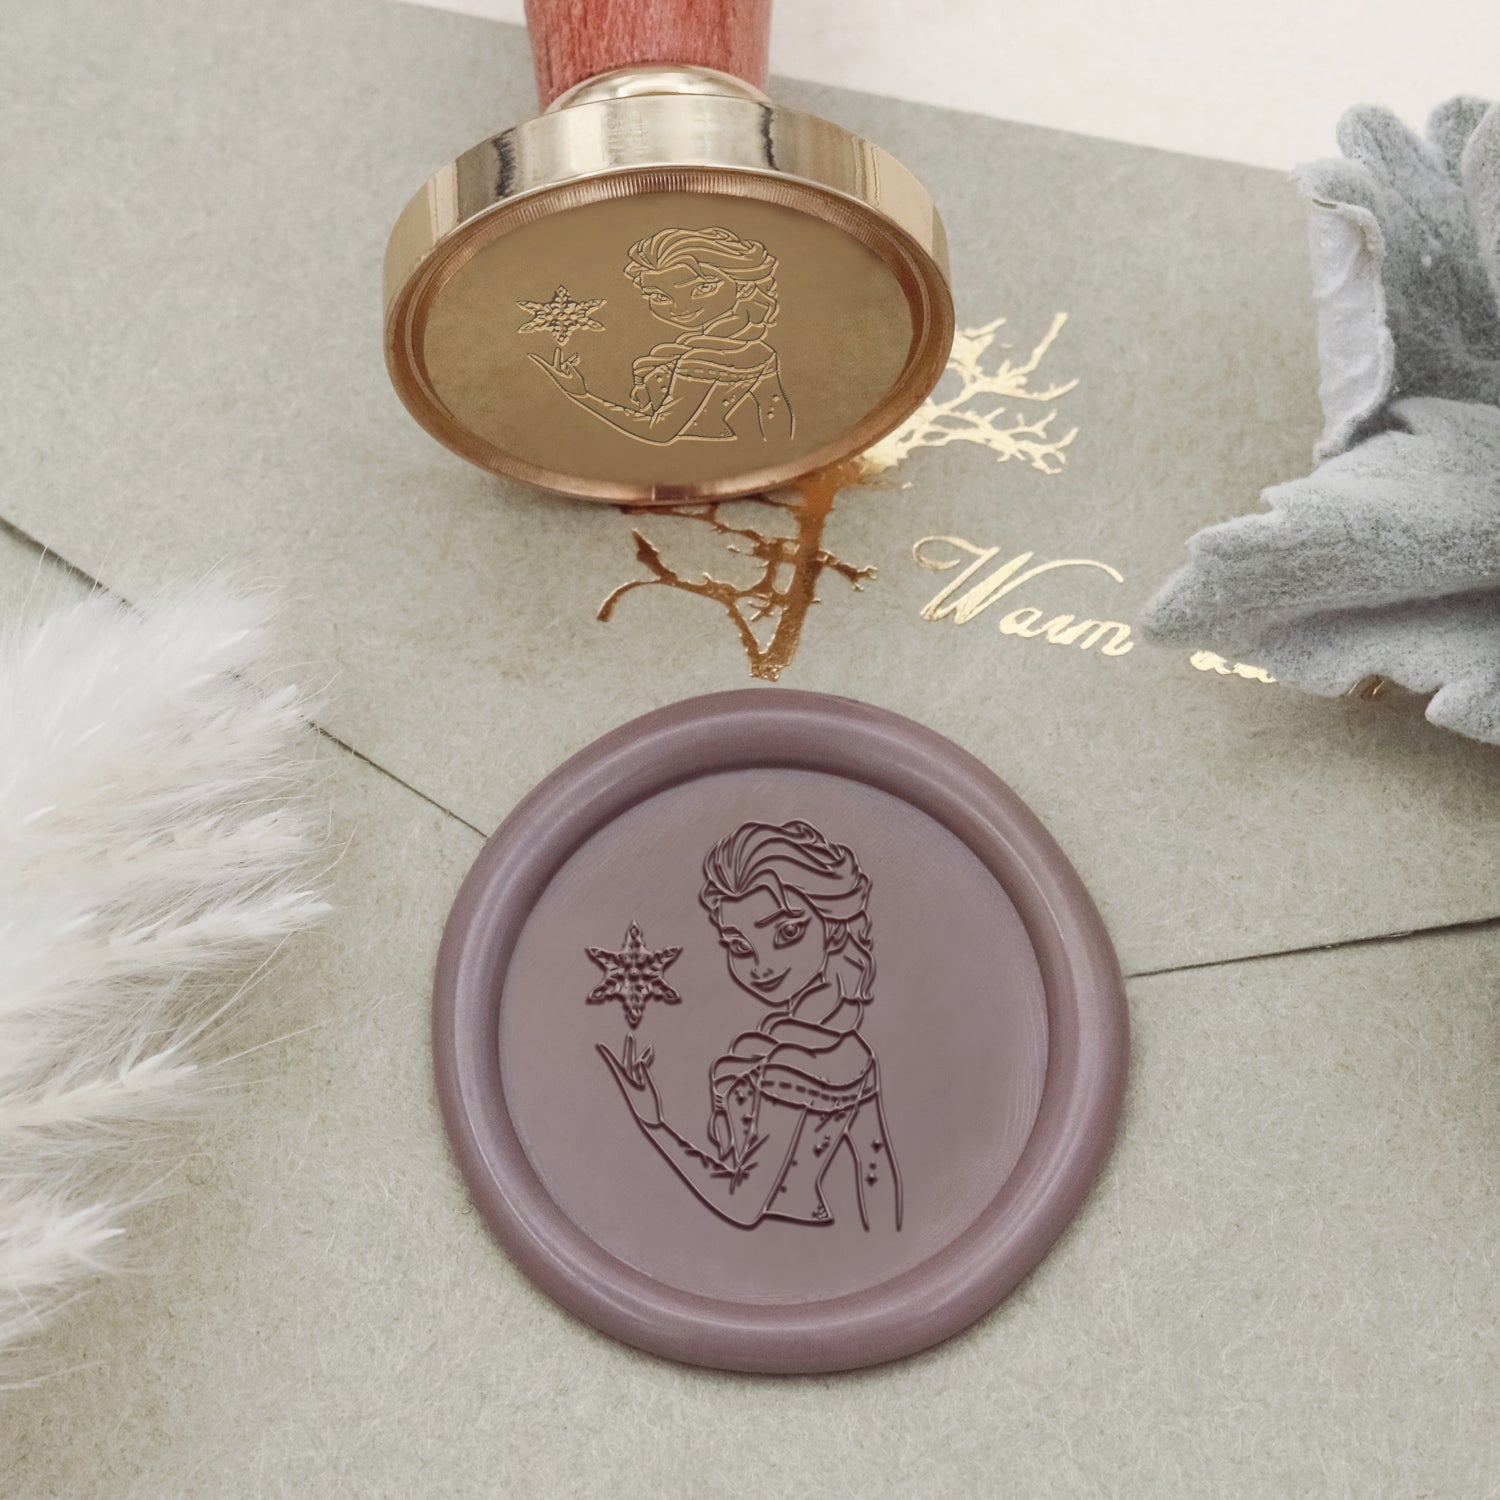 Animated Film Fairytale Character Wax Seal Stamp - 5 2